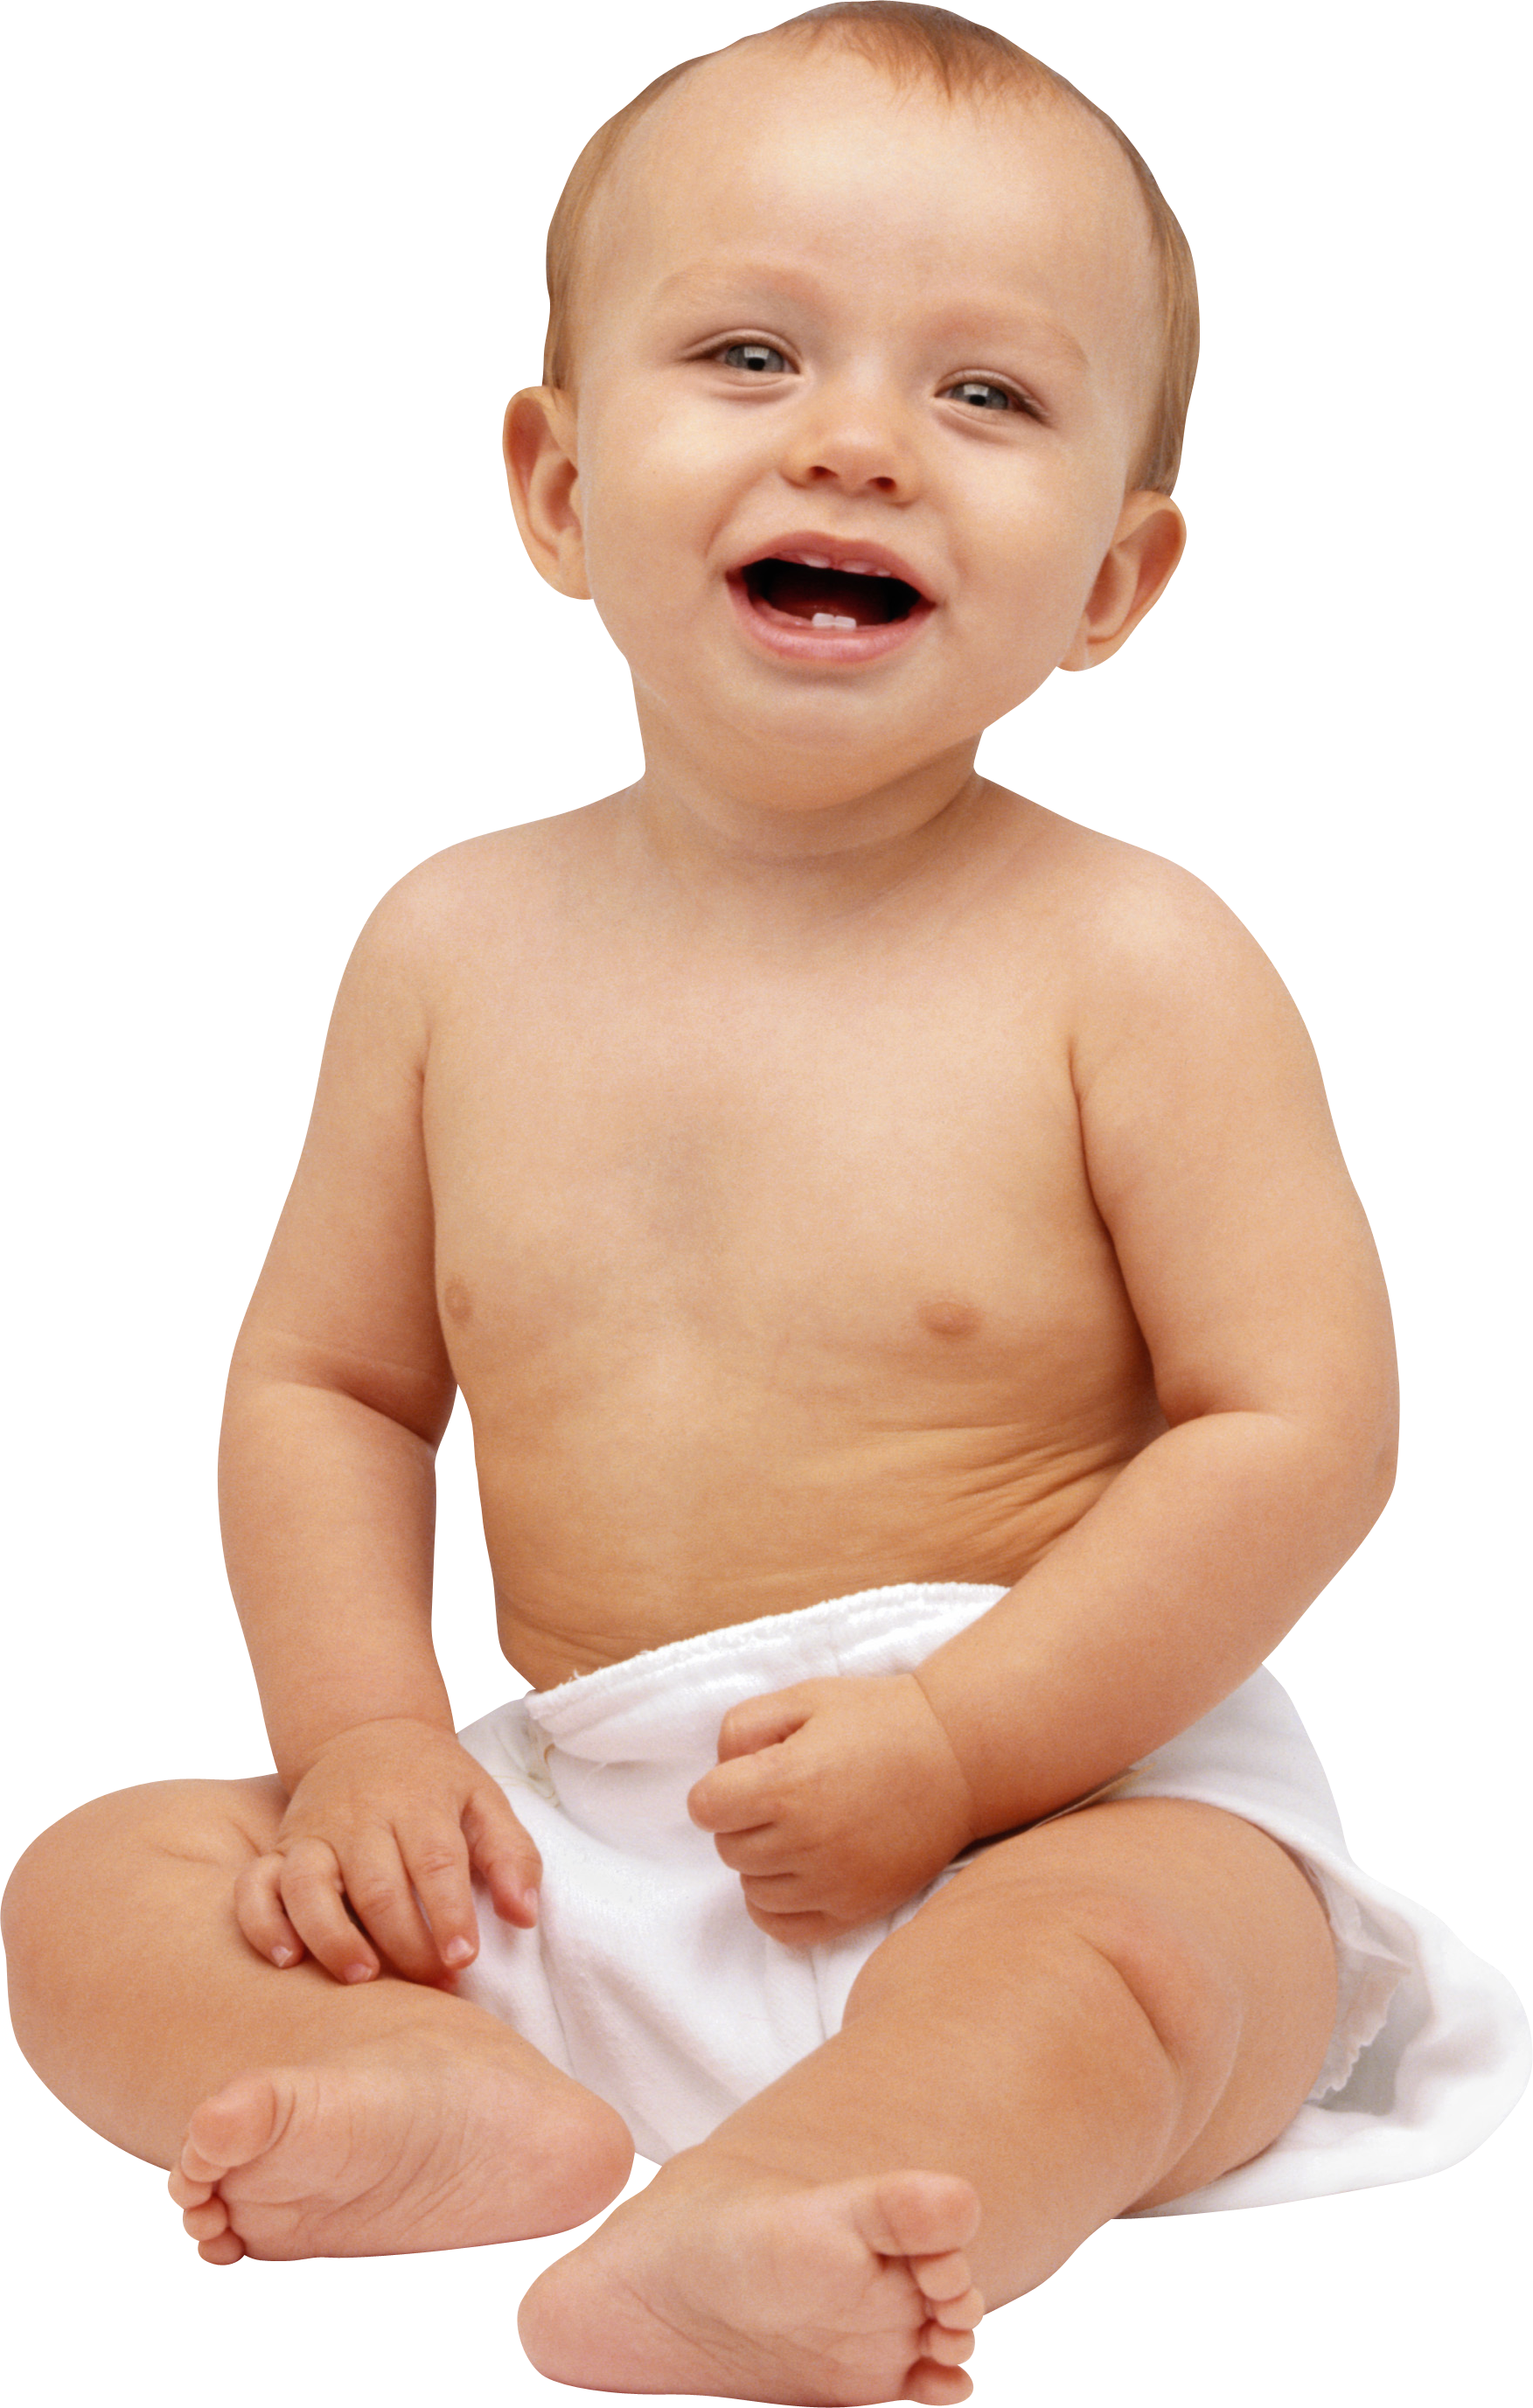 Baby Download HD PNG Image